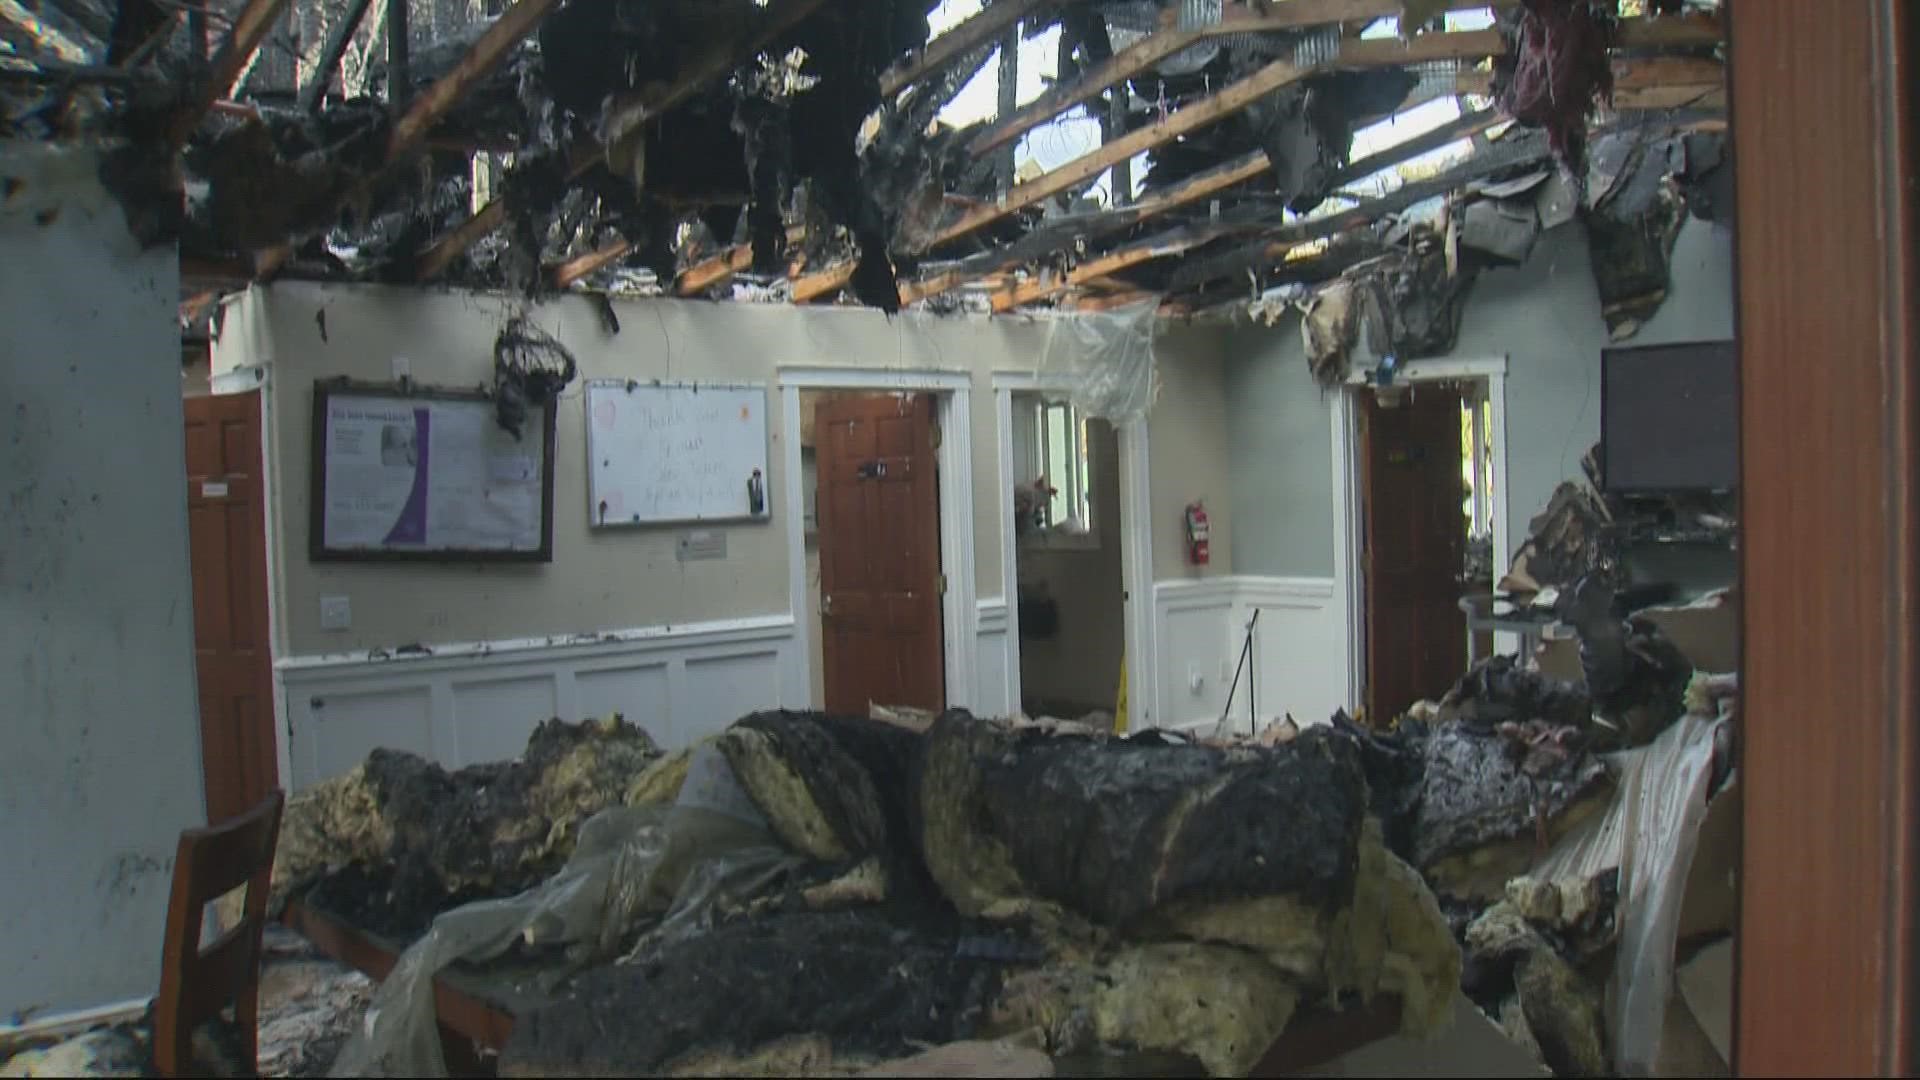 Employees at a residential care facility in Southeast Portland helped evacuate residents after a large fire broke out May 11. Devon Haskins spoke to a staff member.